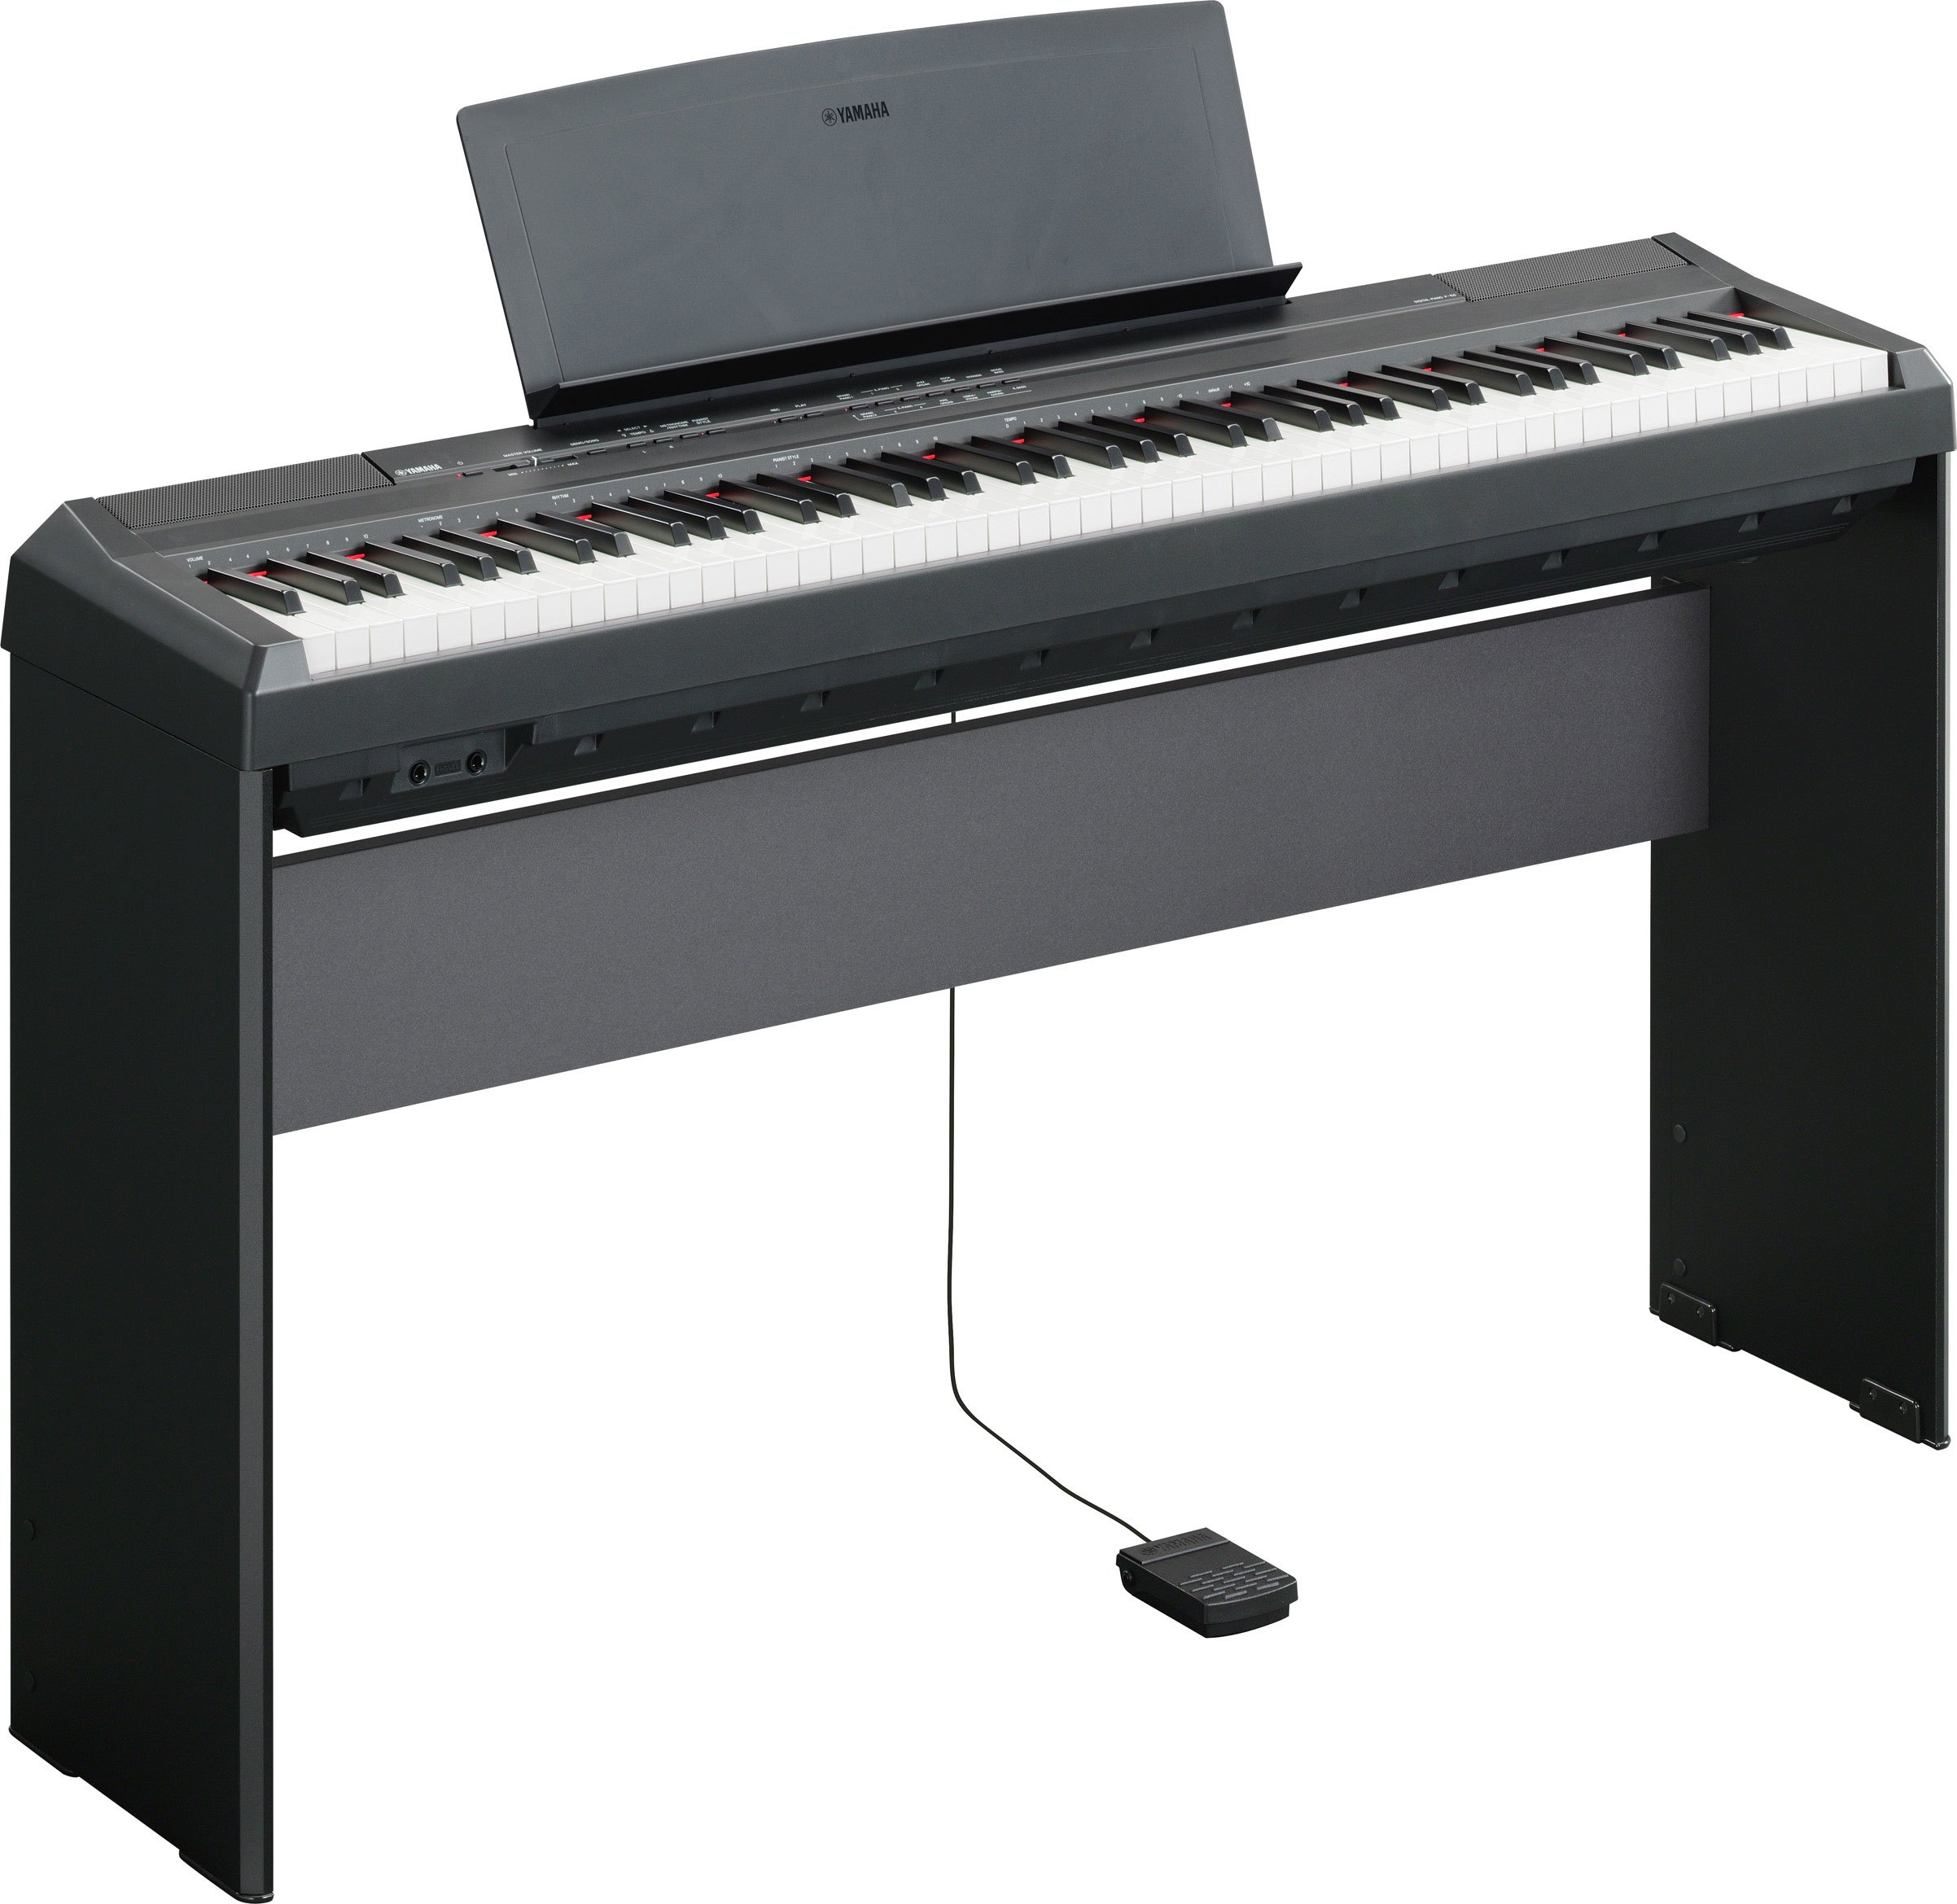 P-105 - Overview - P Series - Pianos - Musical Instruments